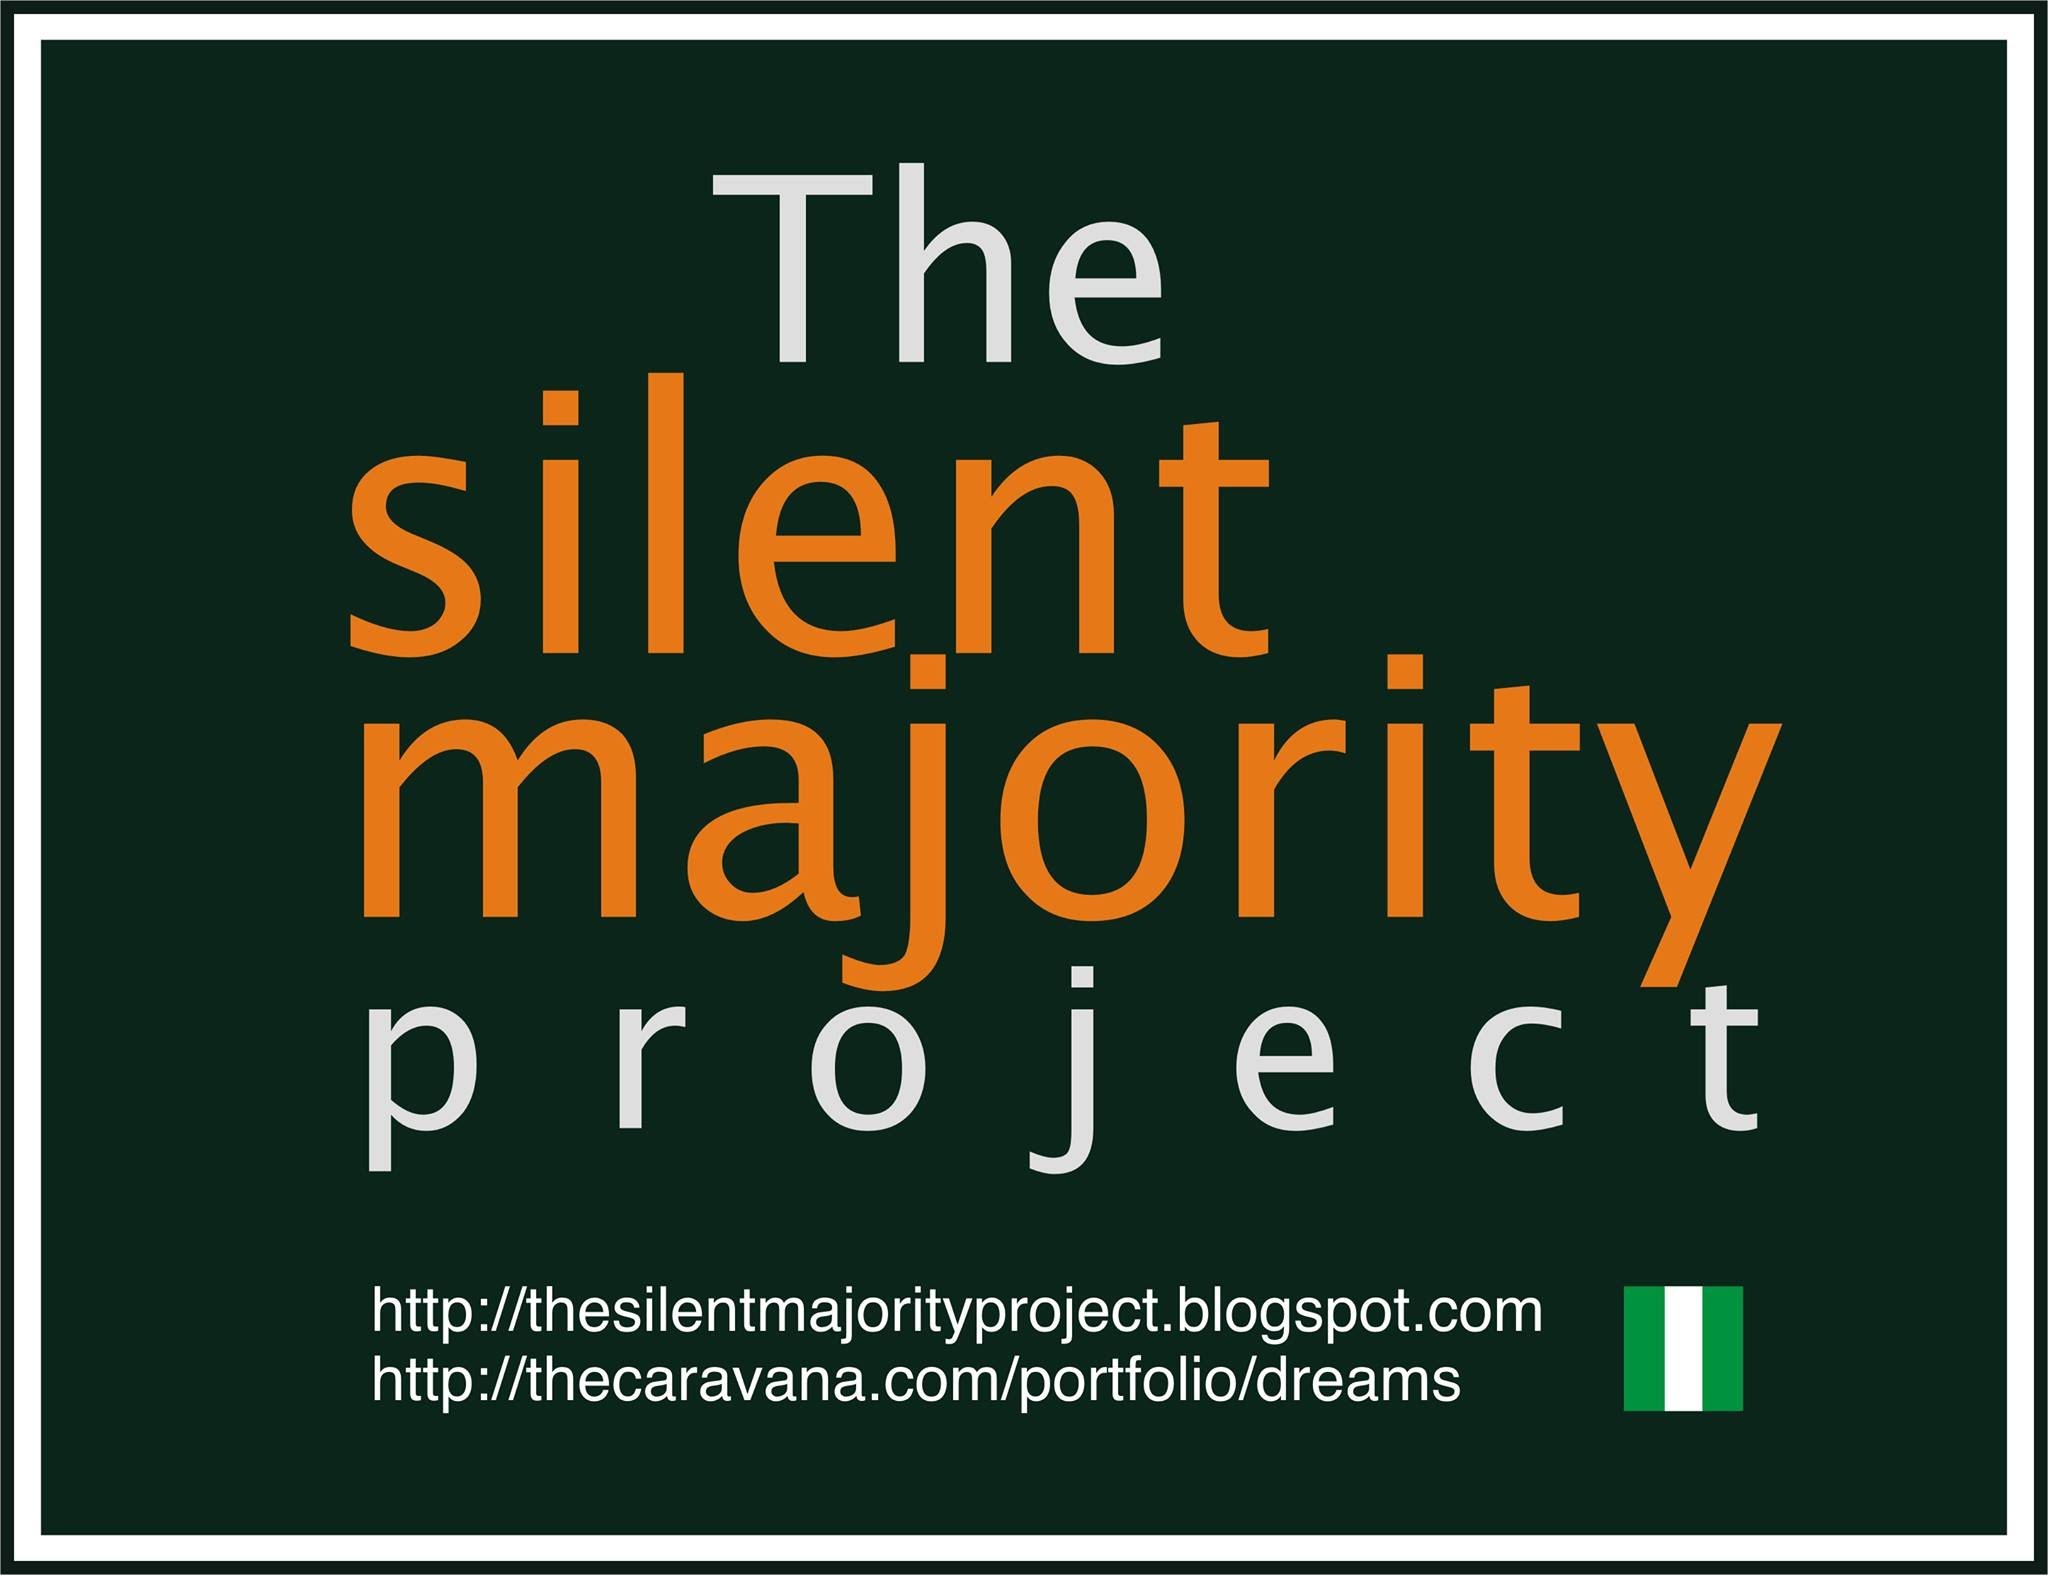 The Silent Majority Project